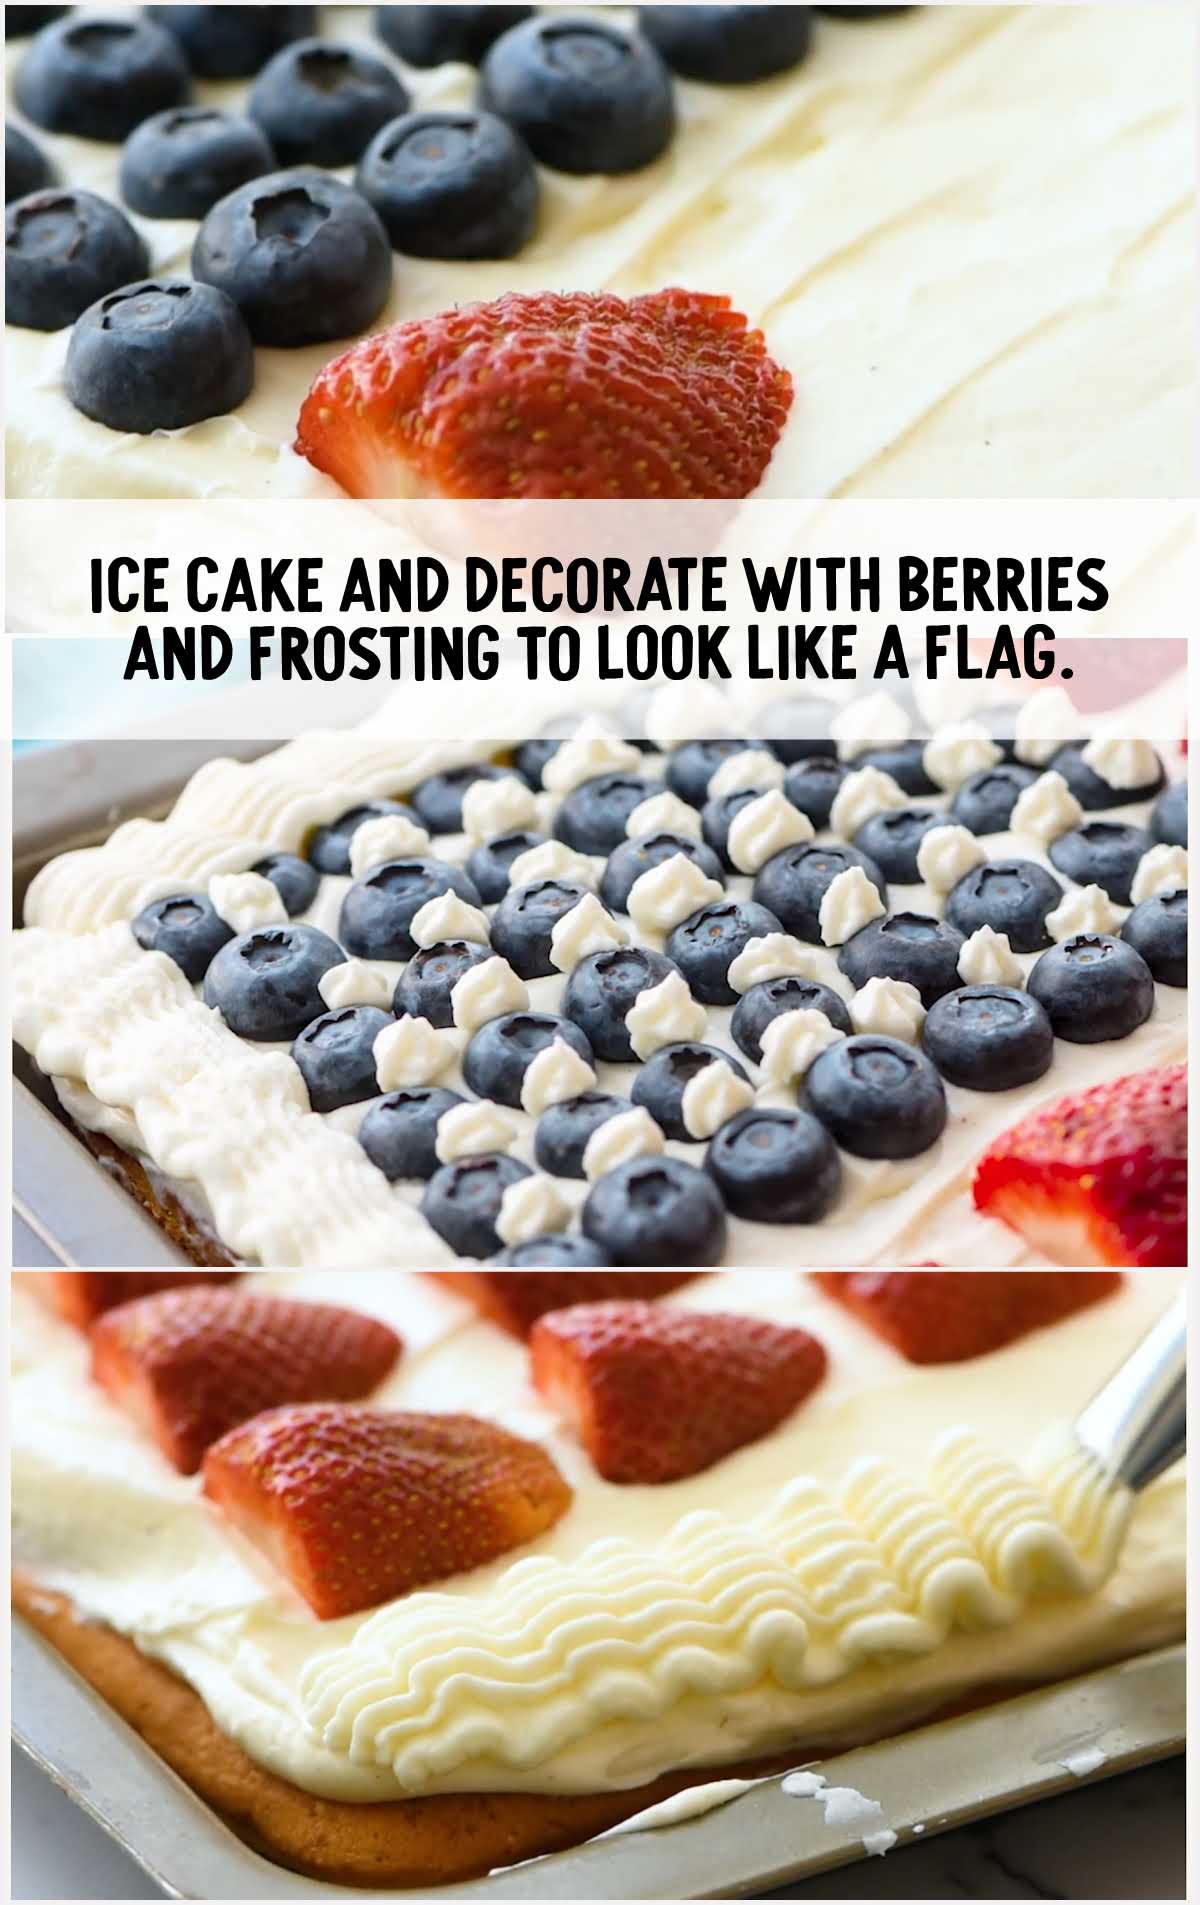 ice cake and decorate with berries and frosting on the cake